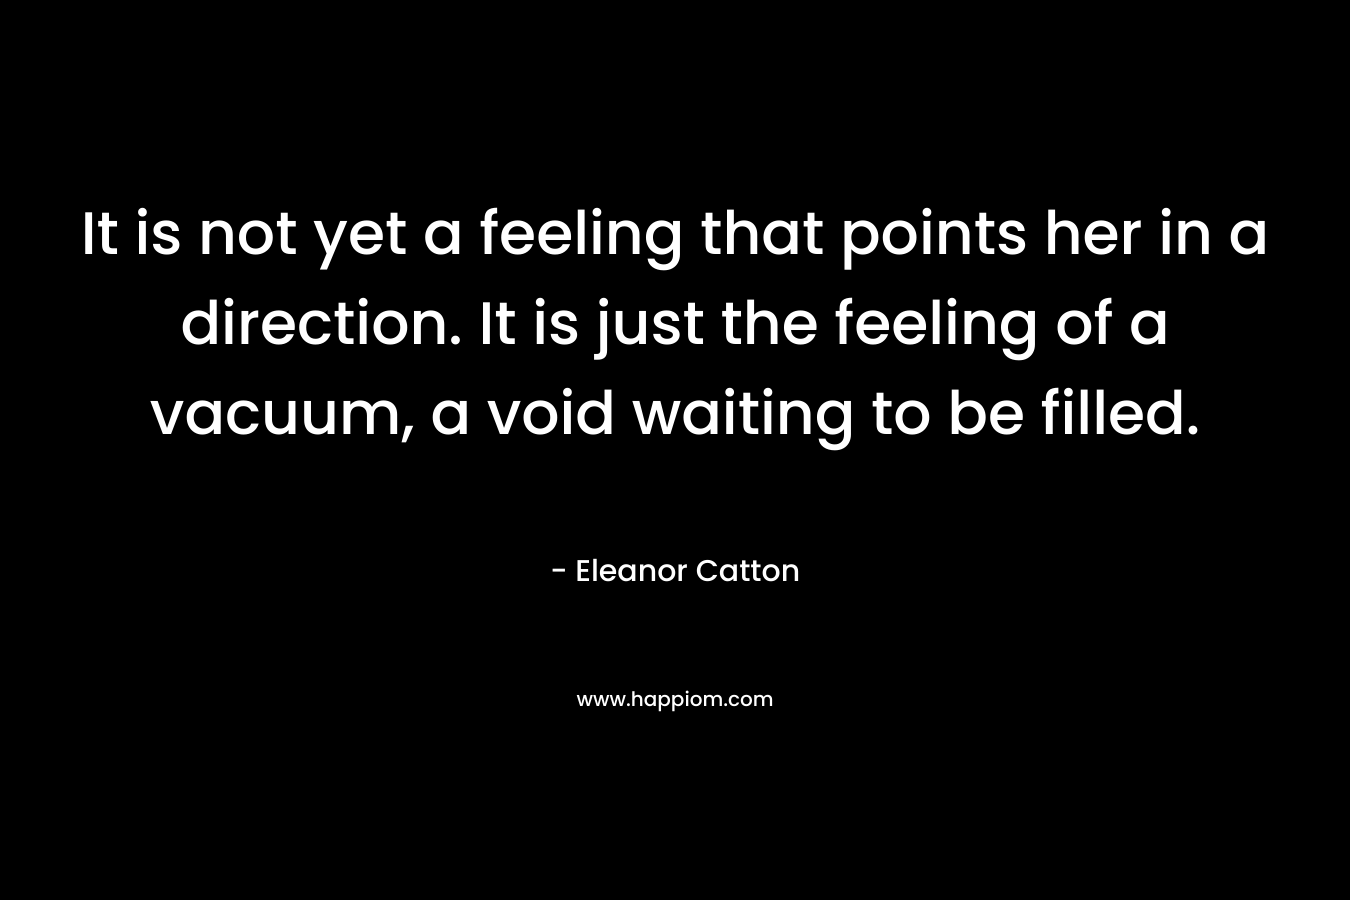 It is not yet a feeling that points her in a direction. It is just the feeling of a vacuum, a void waiting to be filled. – Eleanor Catton